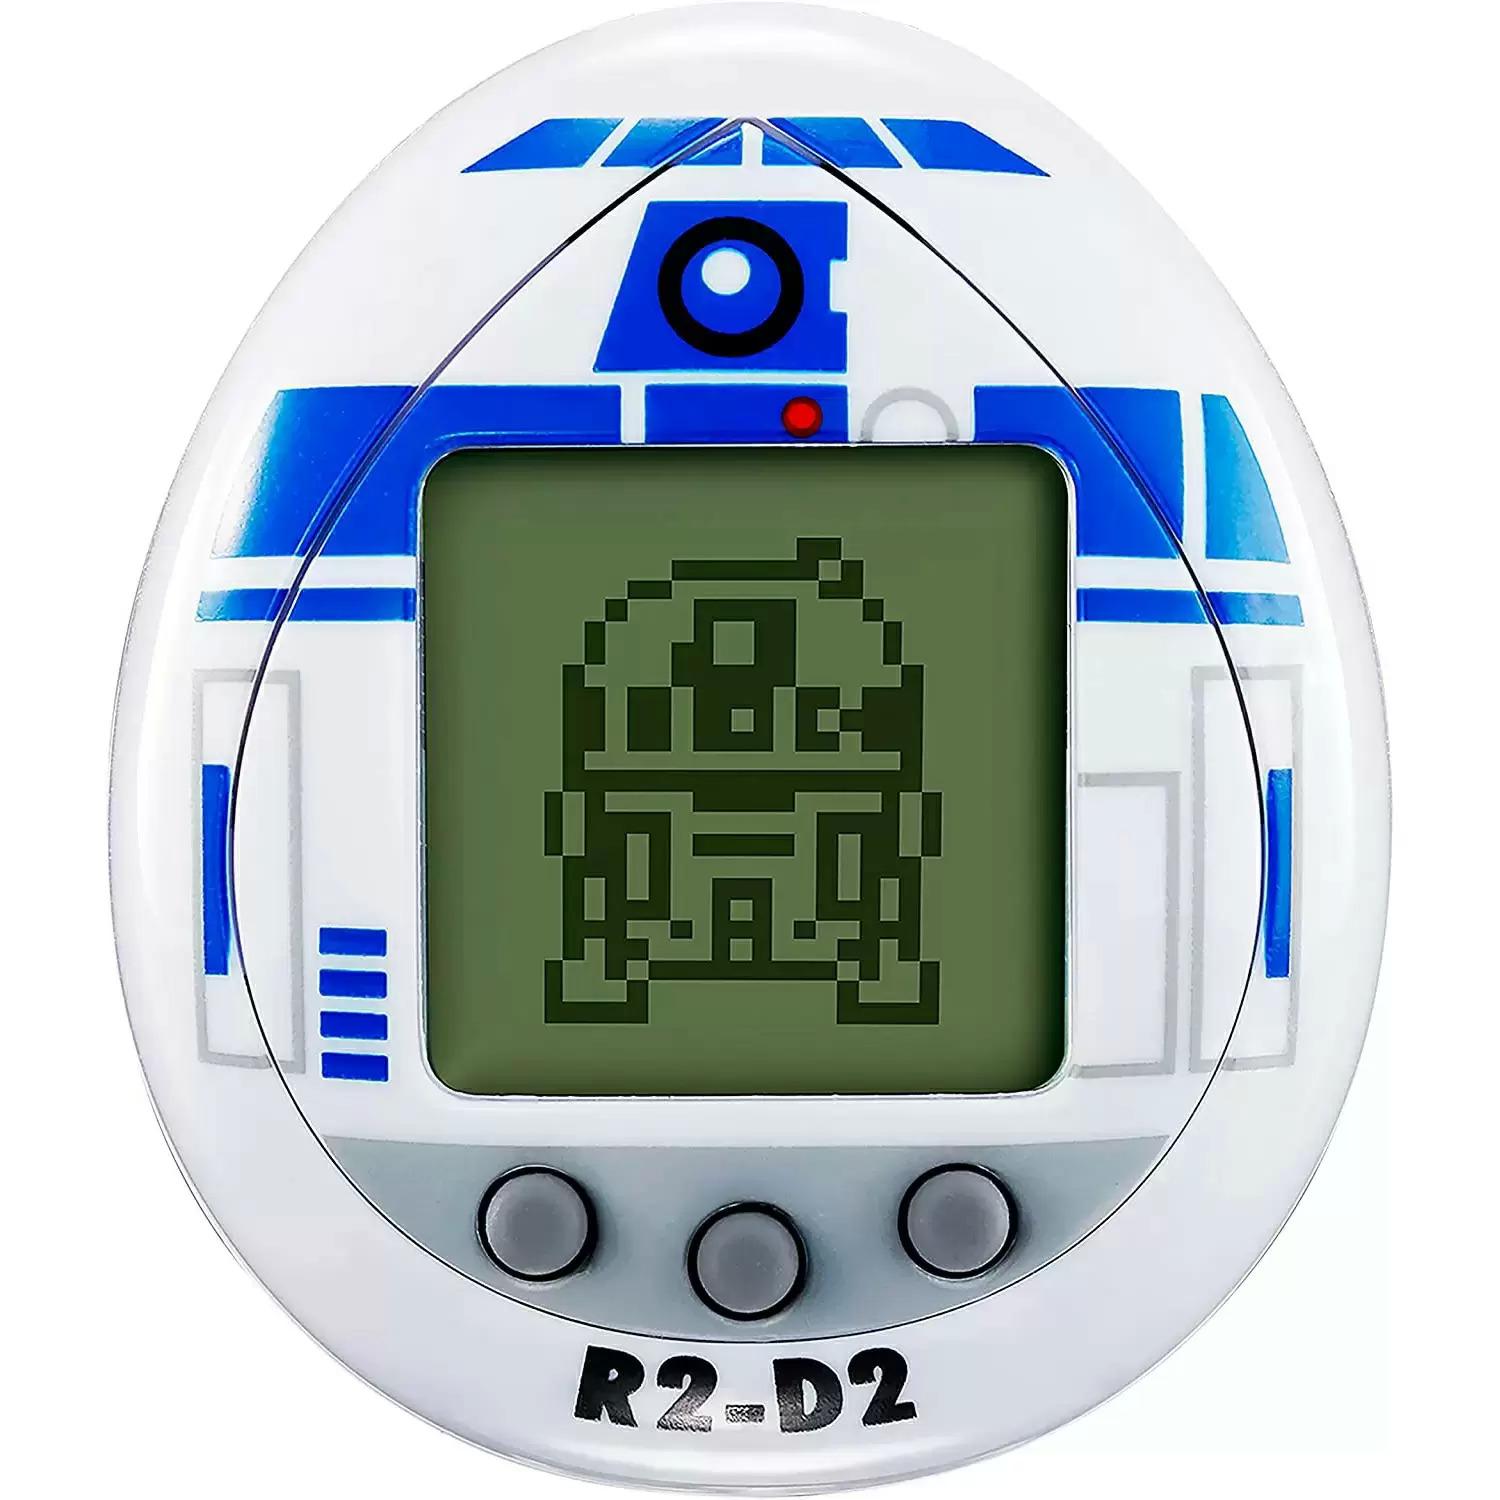 Tamagotchi Star Wars R2-D2 Classic White for $9